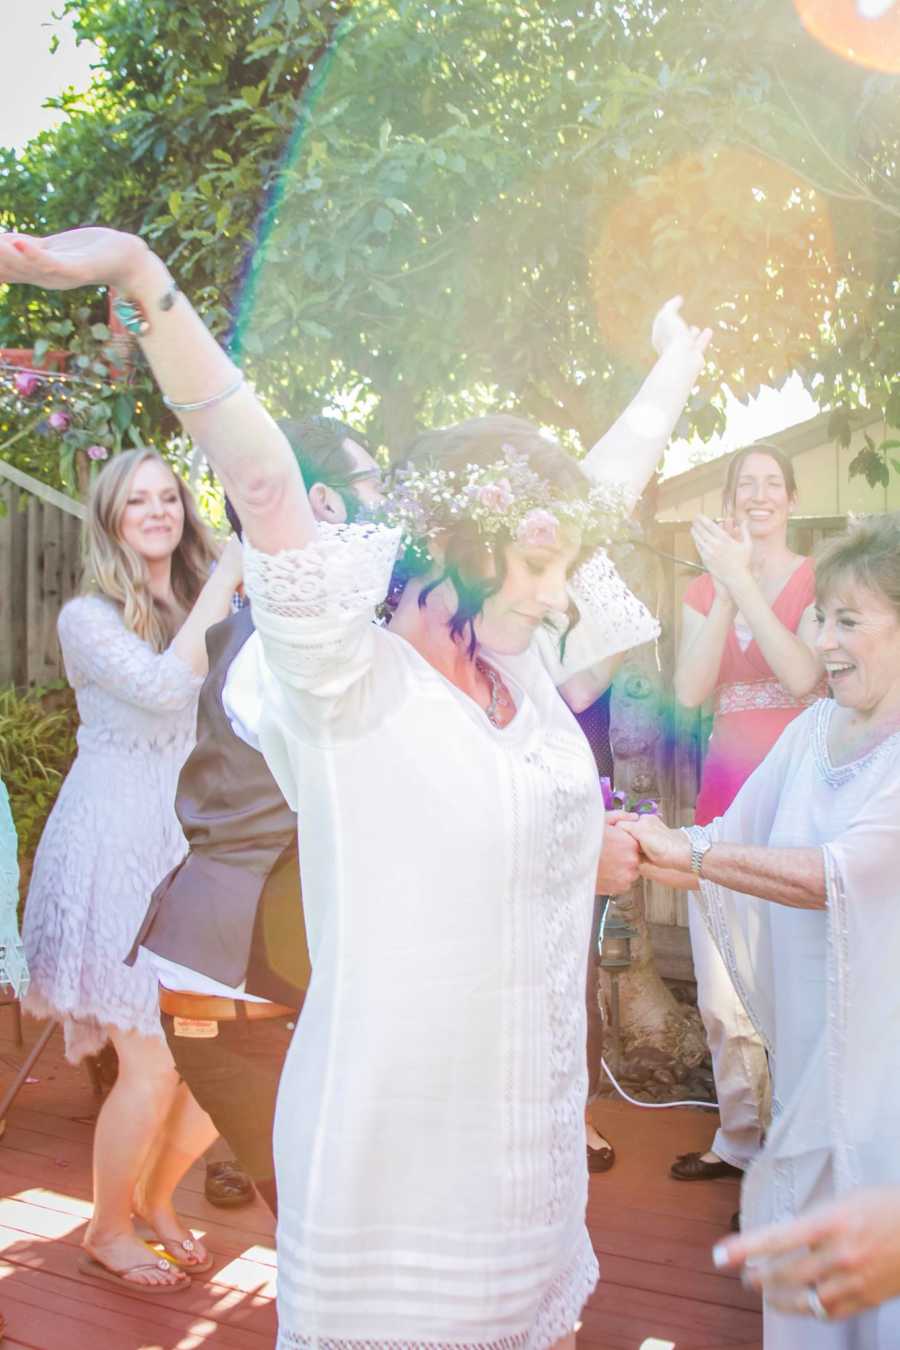 Bride with cancer stands with hands in air as people look at her smiling